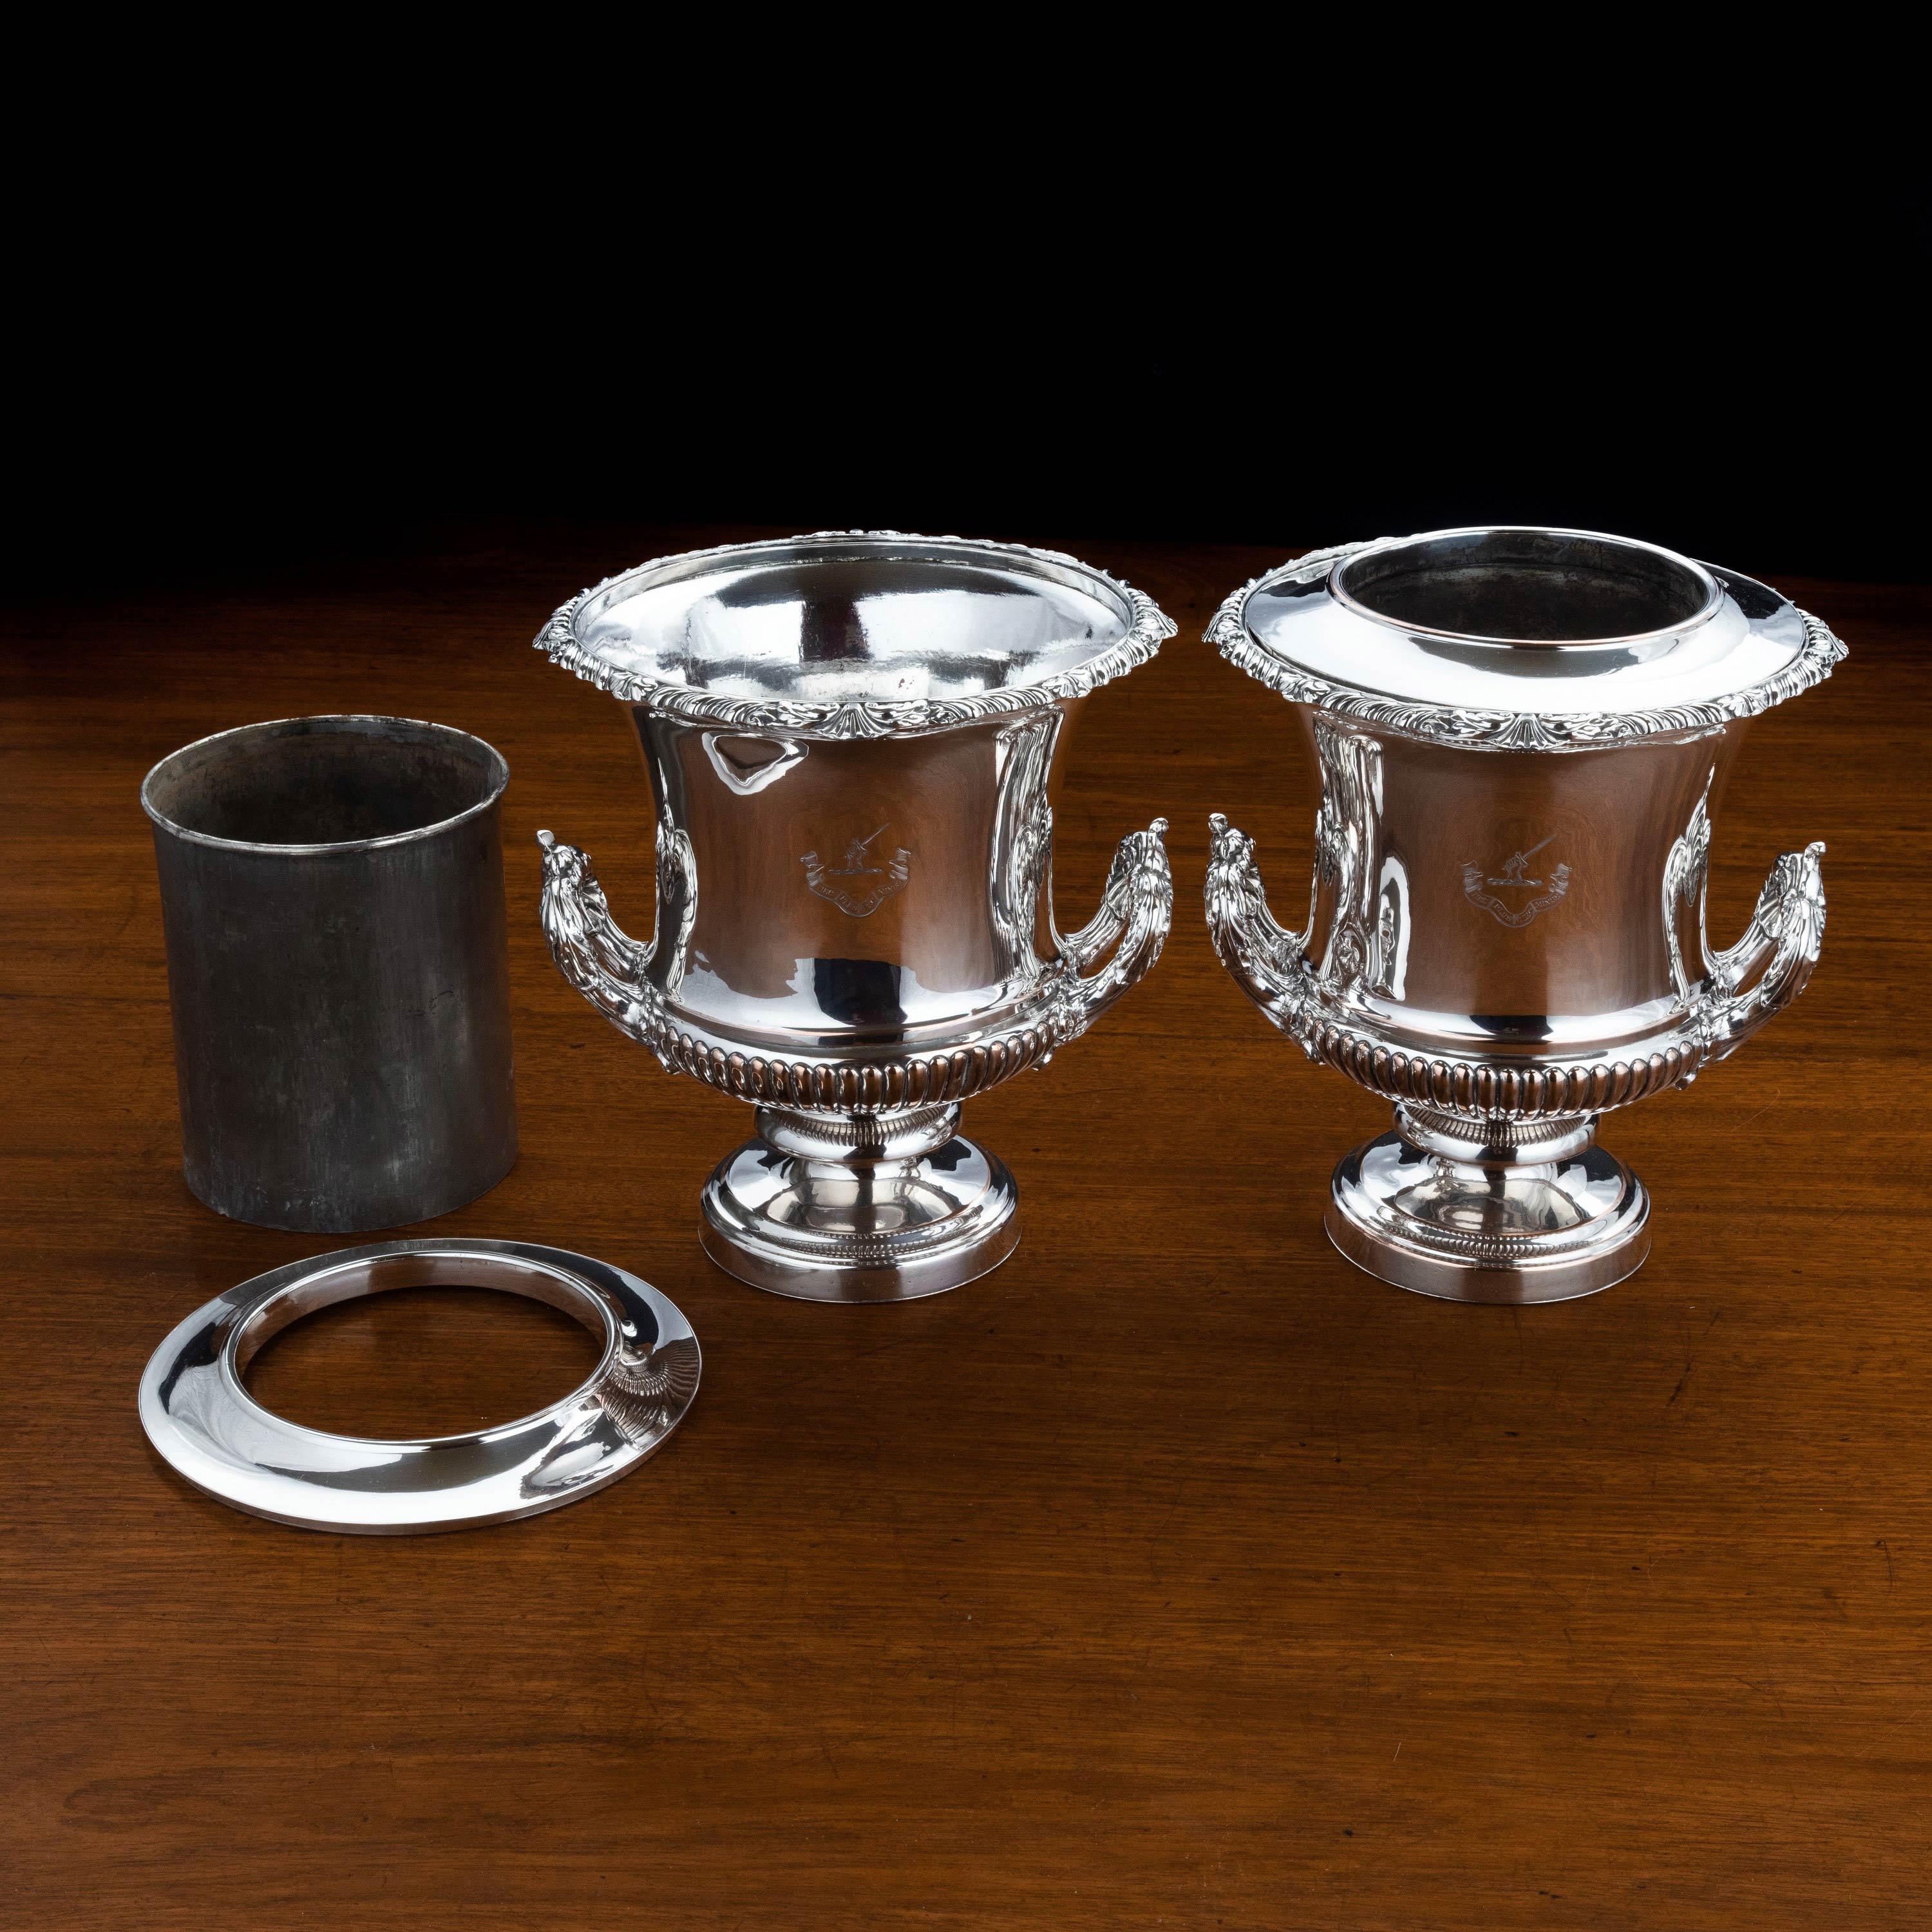 A particularly fine quality pair of Sheffield-plated champagne or wine coolers. With well-cast borders. The centre sections removable. Bearing a noble crest.
The smaller one weighs 2960g and the larger 3095g.